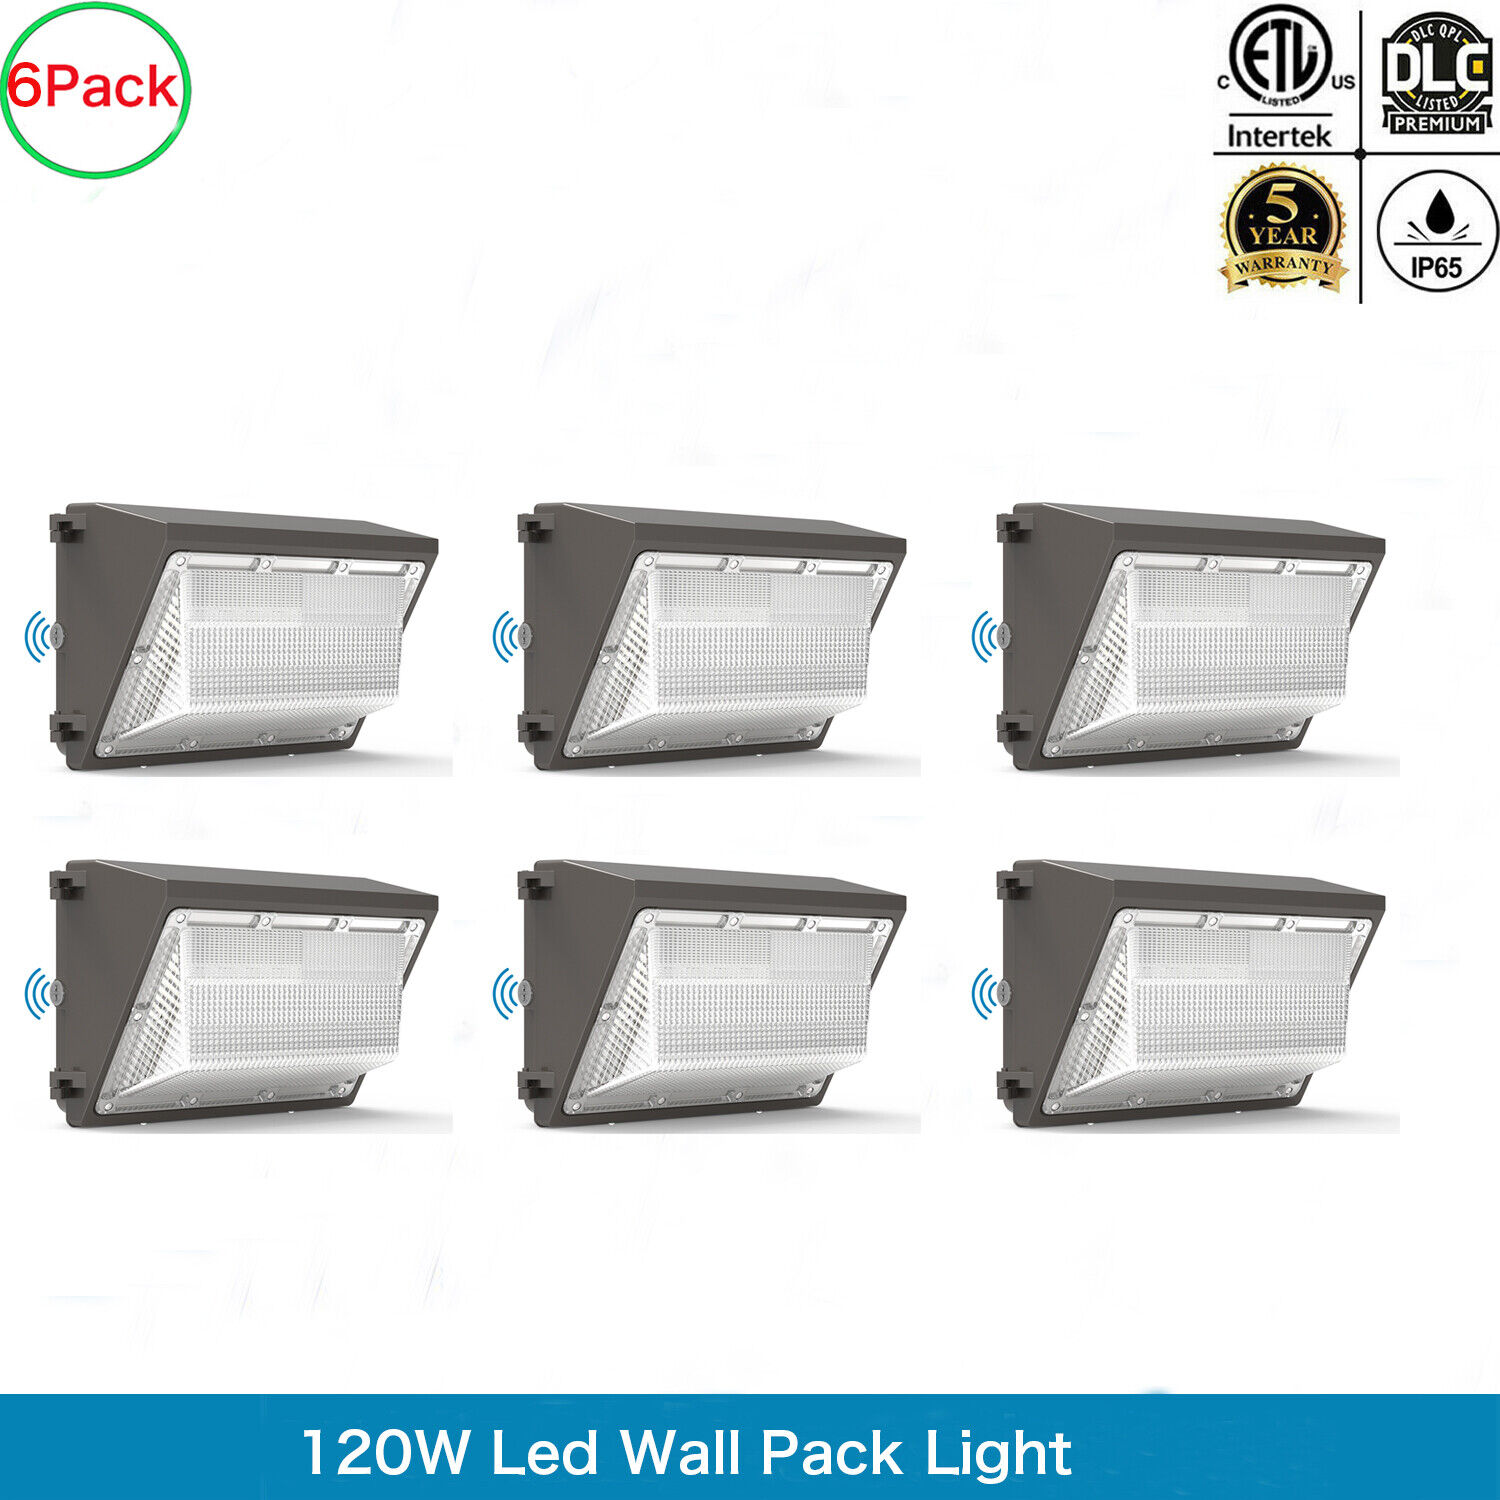 6PCS 120W Led Wall Pack Light photocell Dusk to Dawn Commercial Outdoor Security